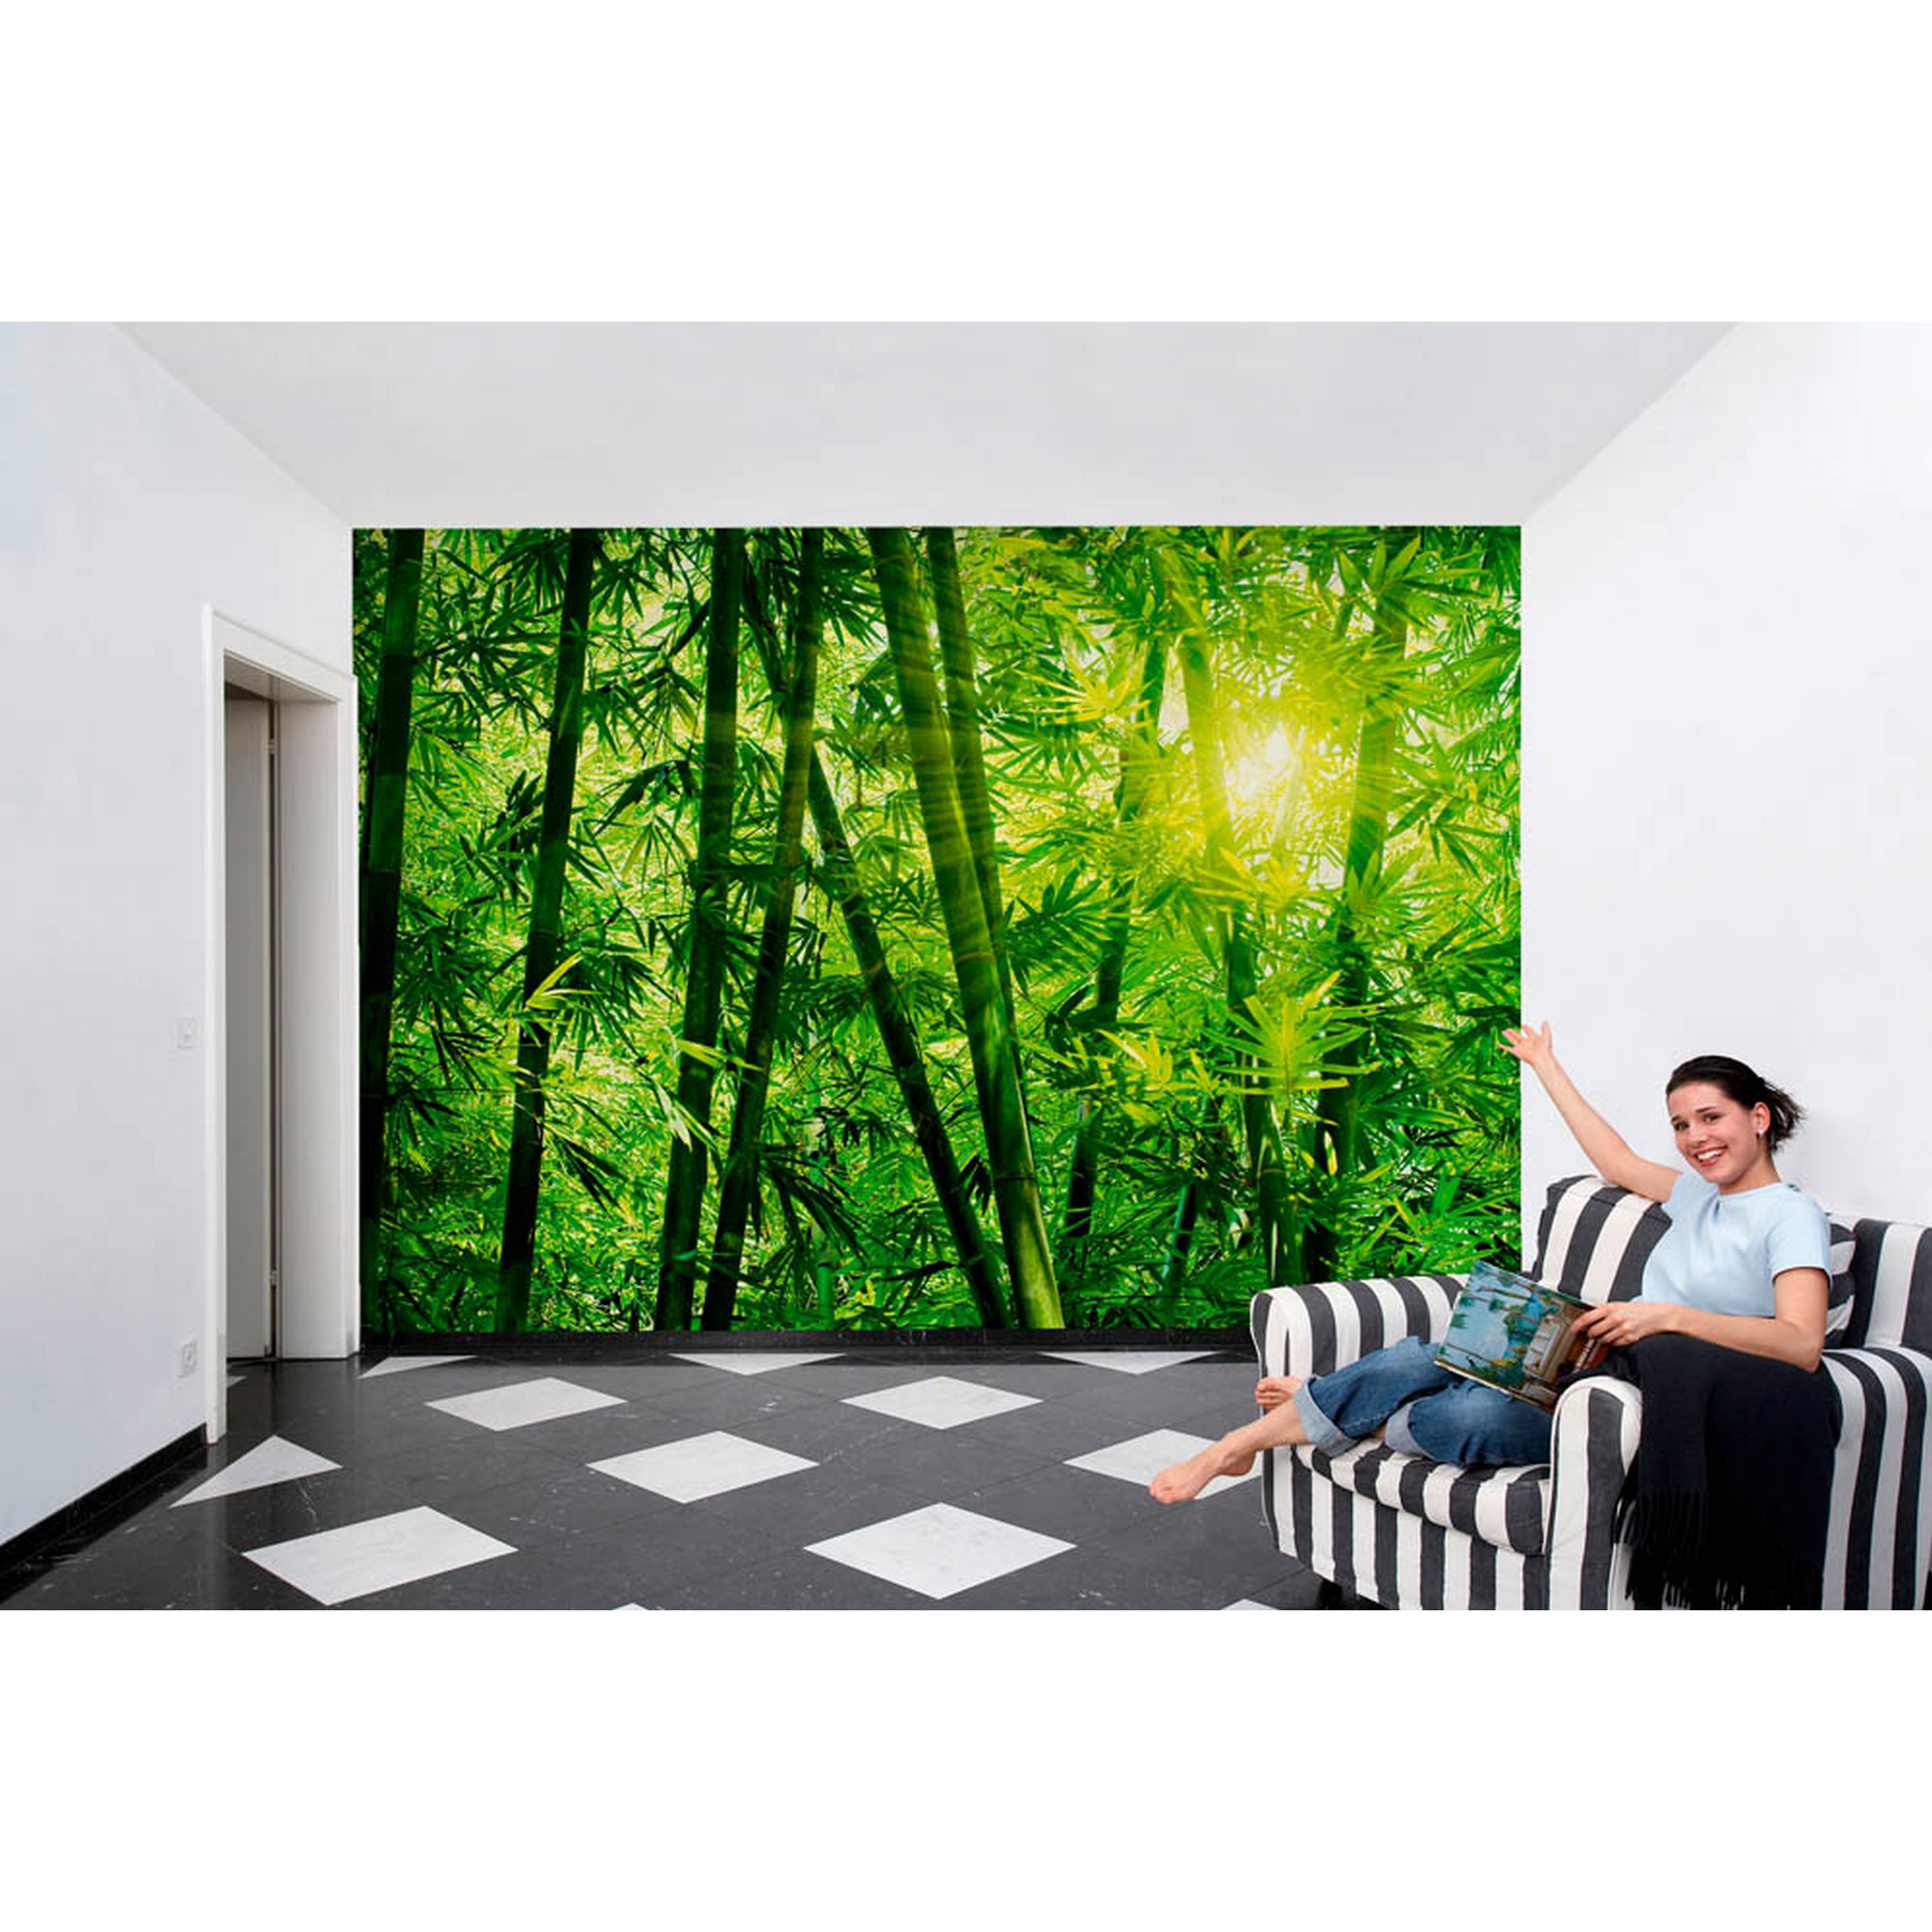 Reinders Fototapete 'Bambus' 366 x 254 cm + product picture